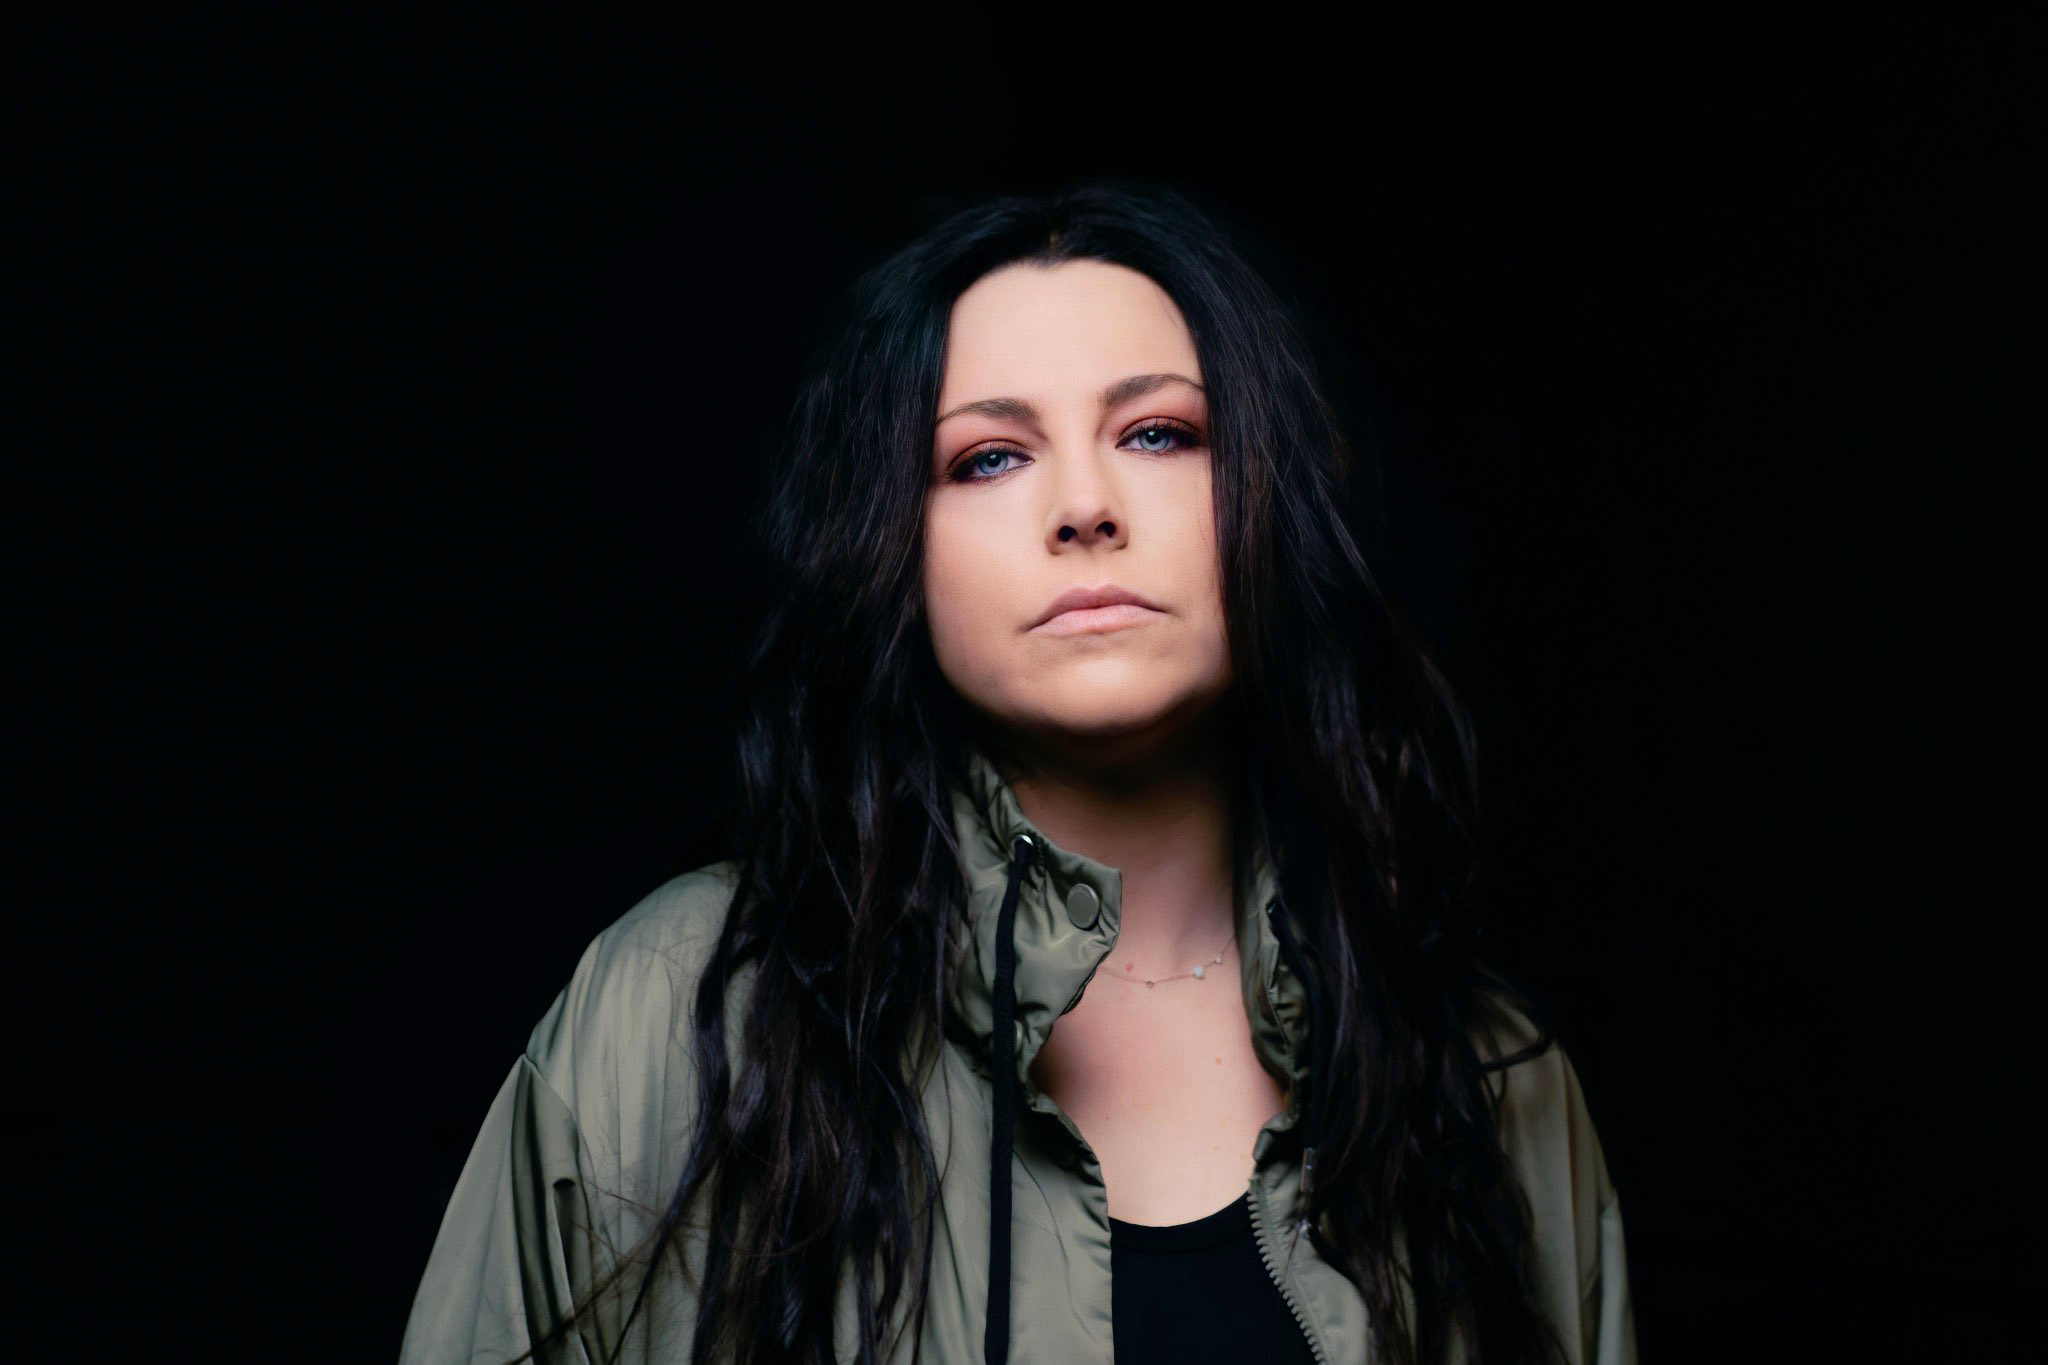 2048x1365
Keywords: amy lee;photoshoot;the bitter truth;hq